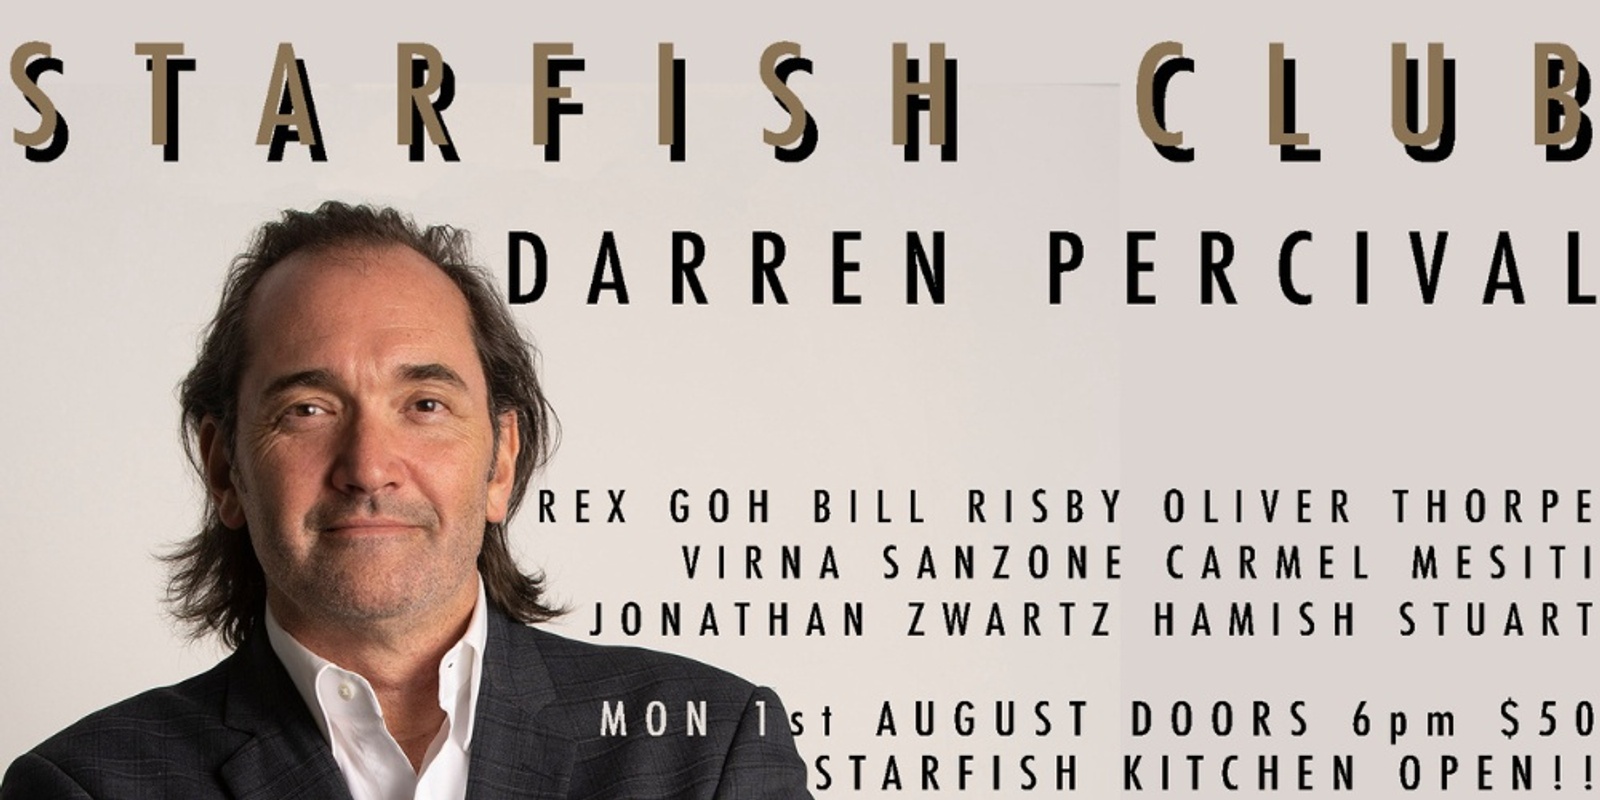 Banner image for Starfish Club Darren Percival 1 August 2022